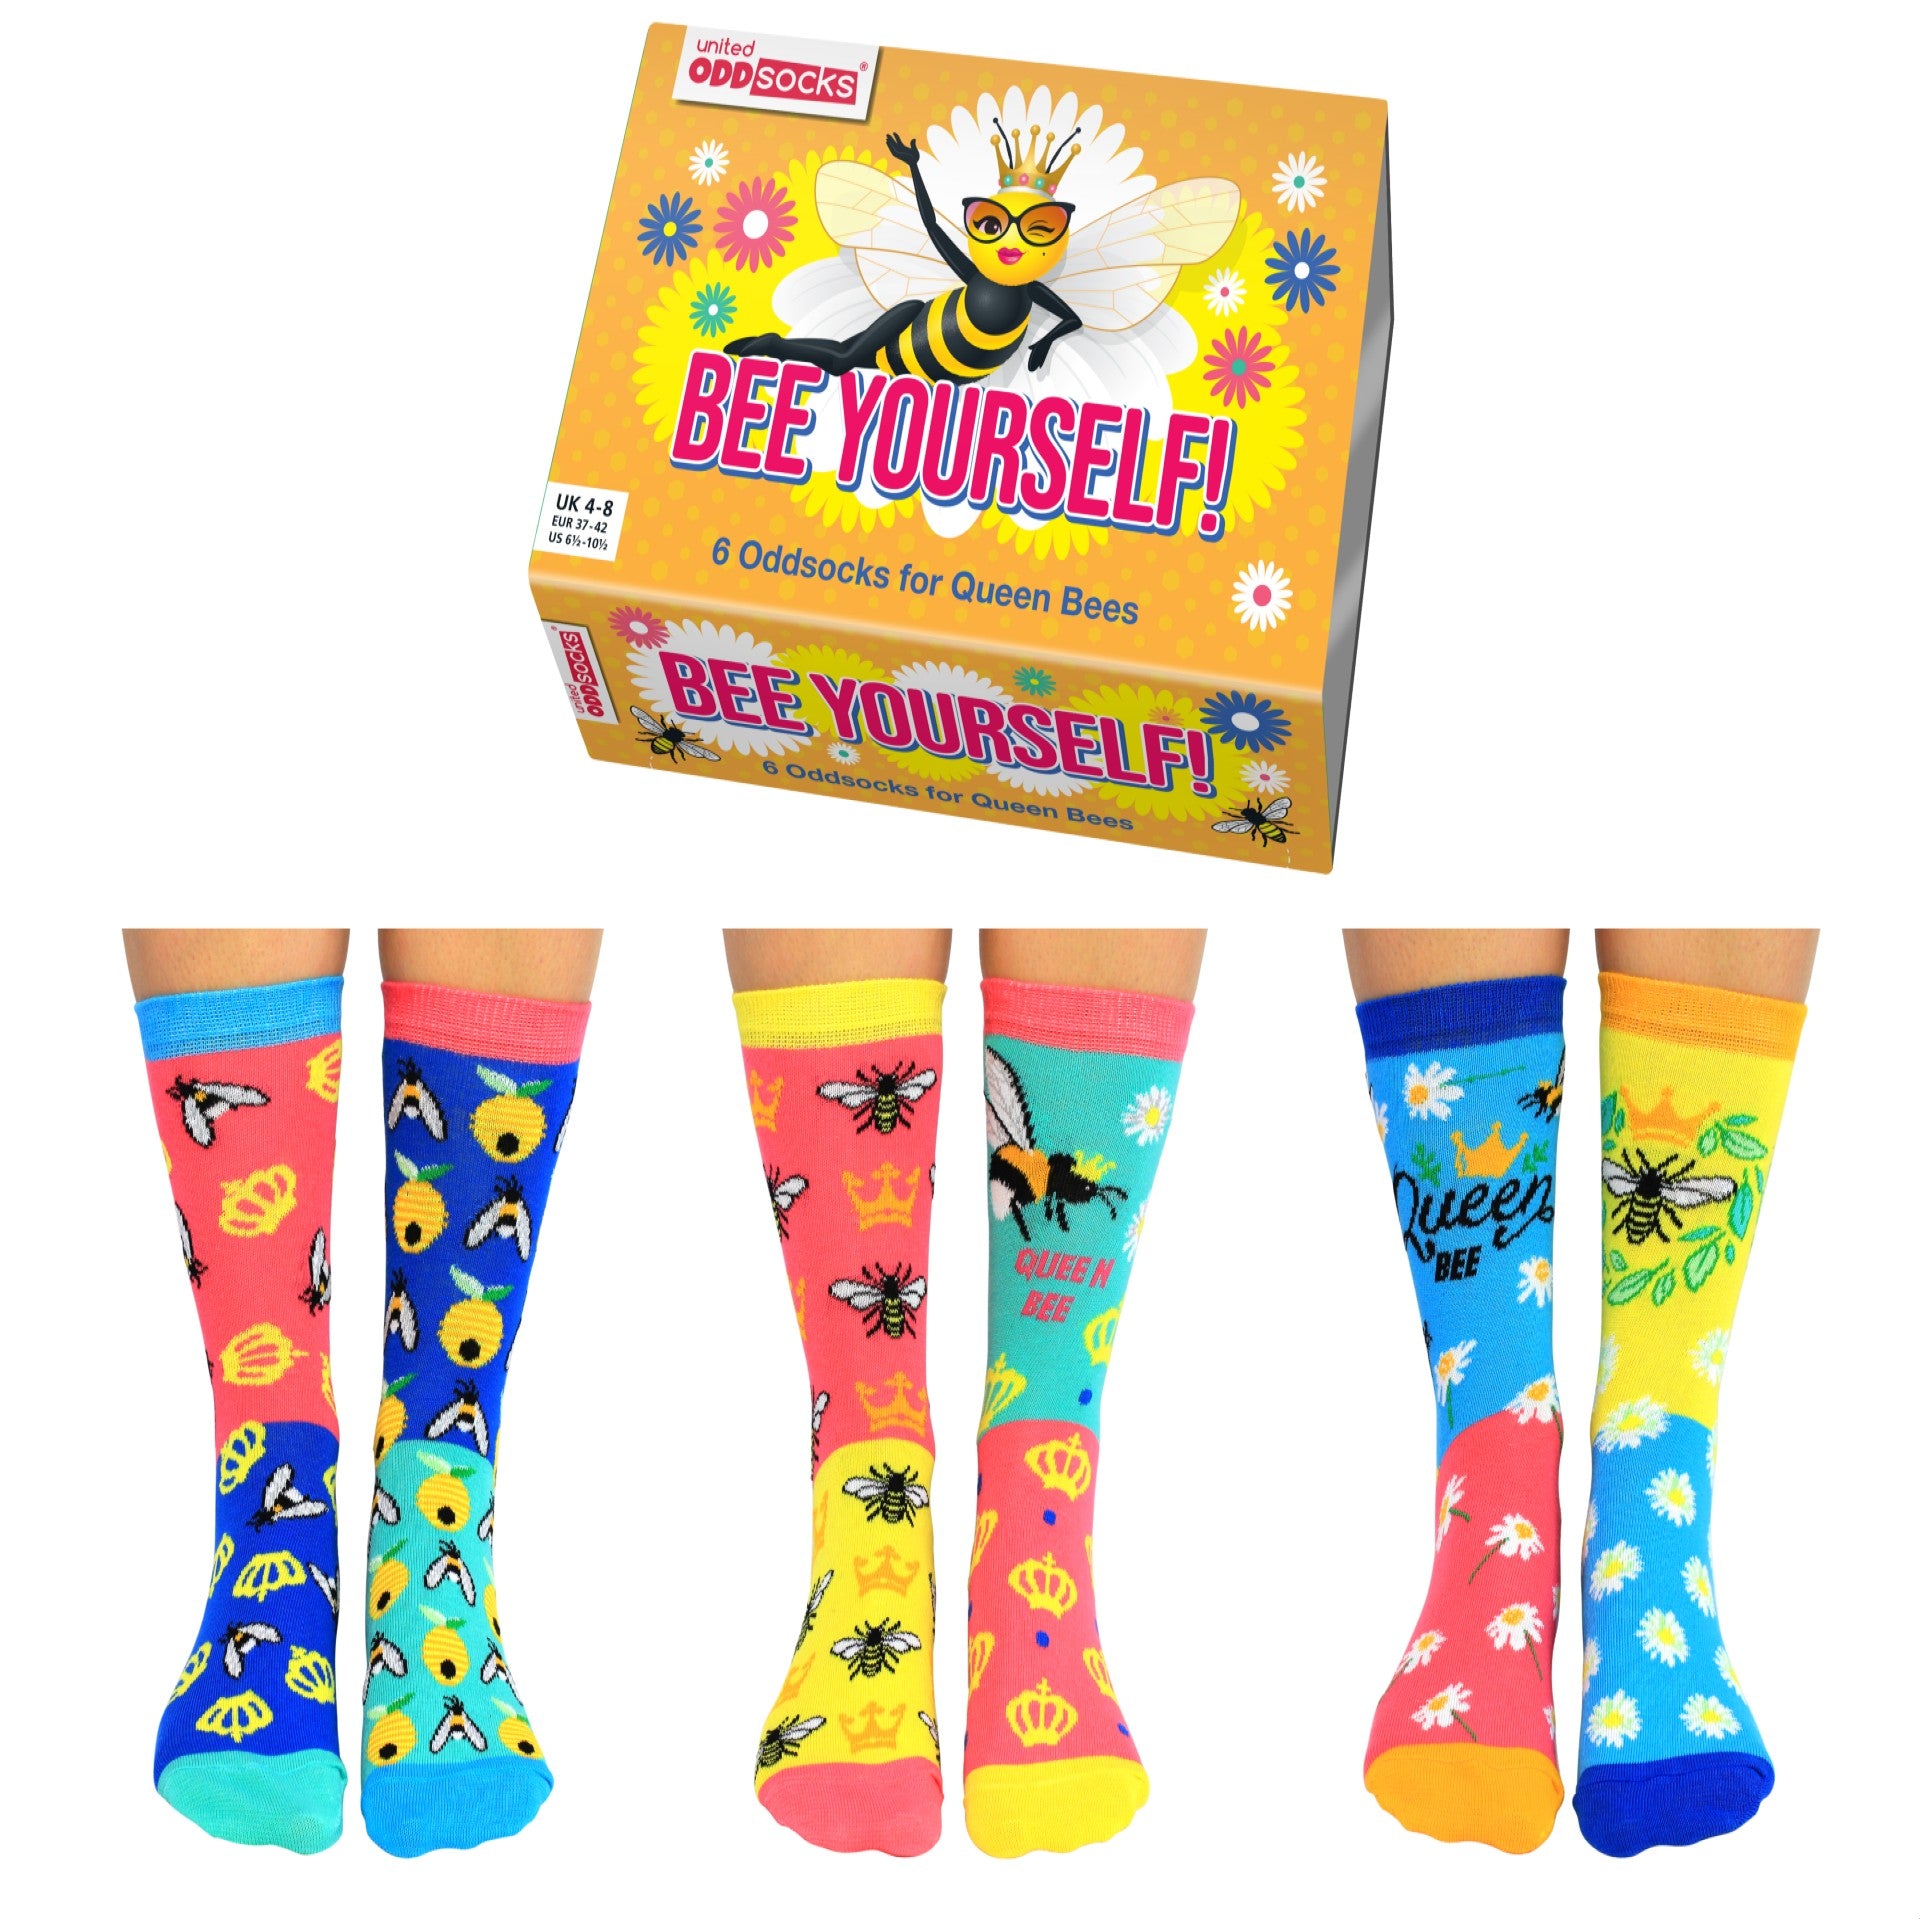 United Oddsocks Be Yourself 6 Odd Socks for Queen Bees Gift Box